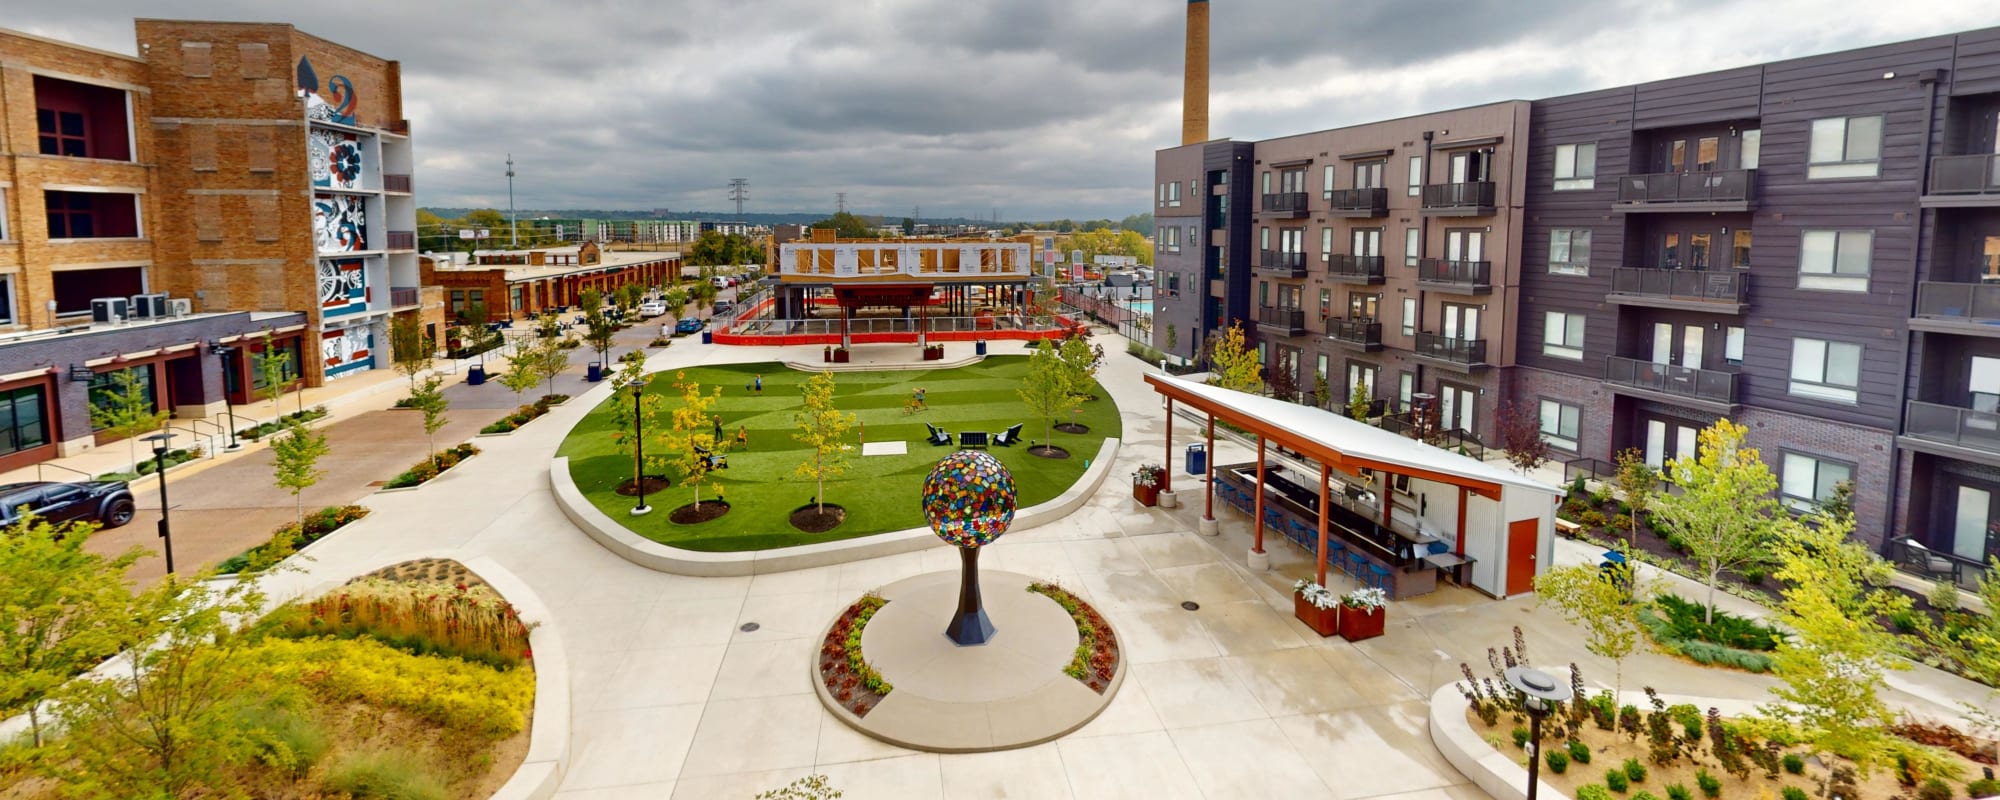 Central Green Park and One-Eyed Jacks Patio Bar at Factory 52 Apartments in Norwood, OH